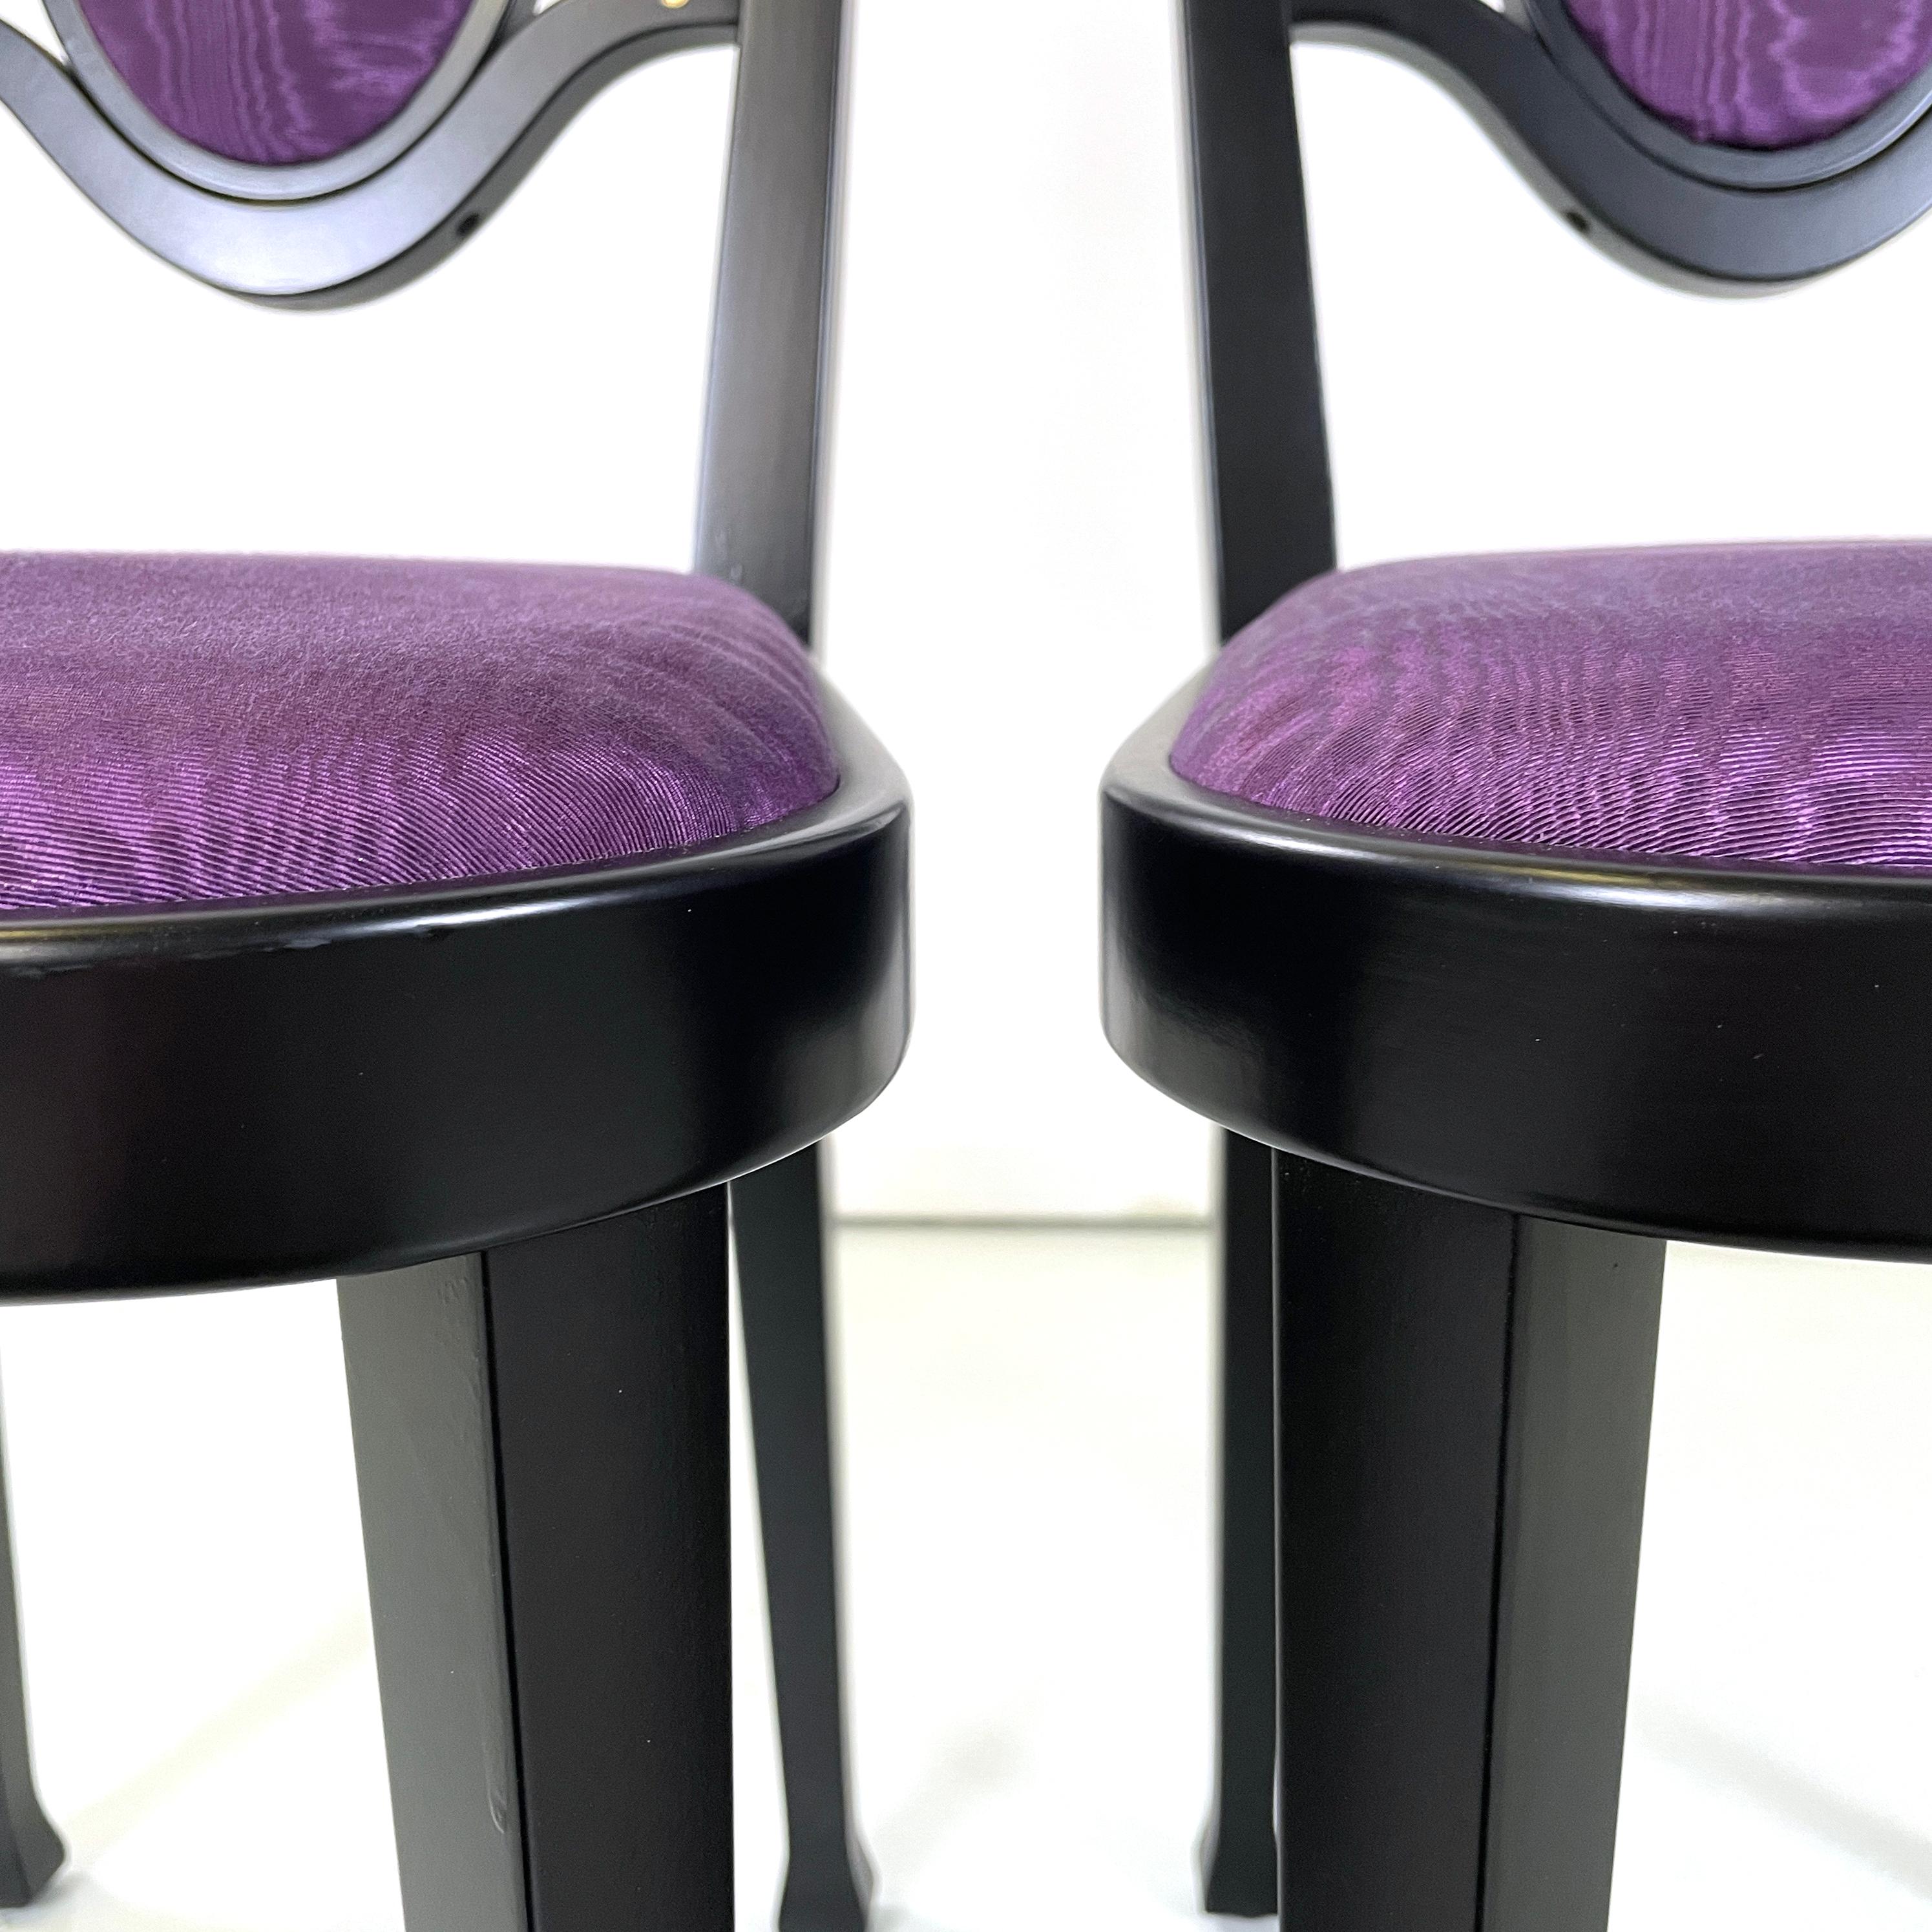 Austrian modern Chairs 414 in black wood purple fabric by Kammerer Thonet, 1990s For Sale 2